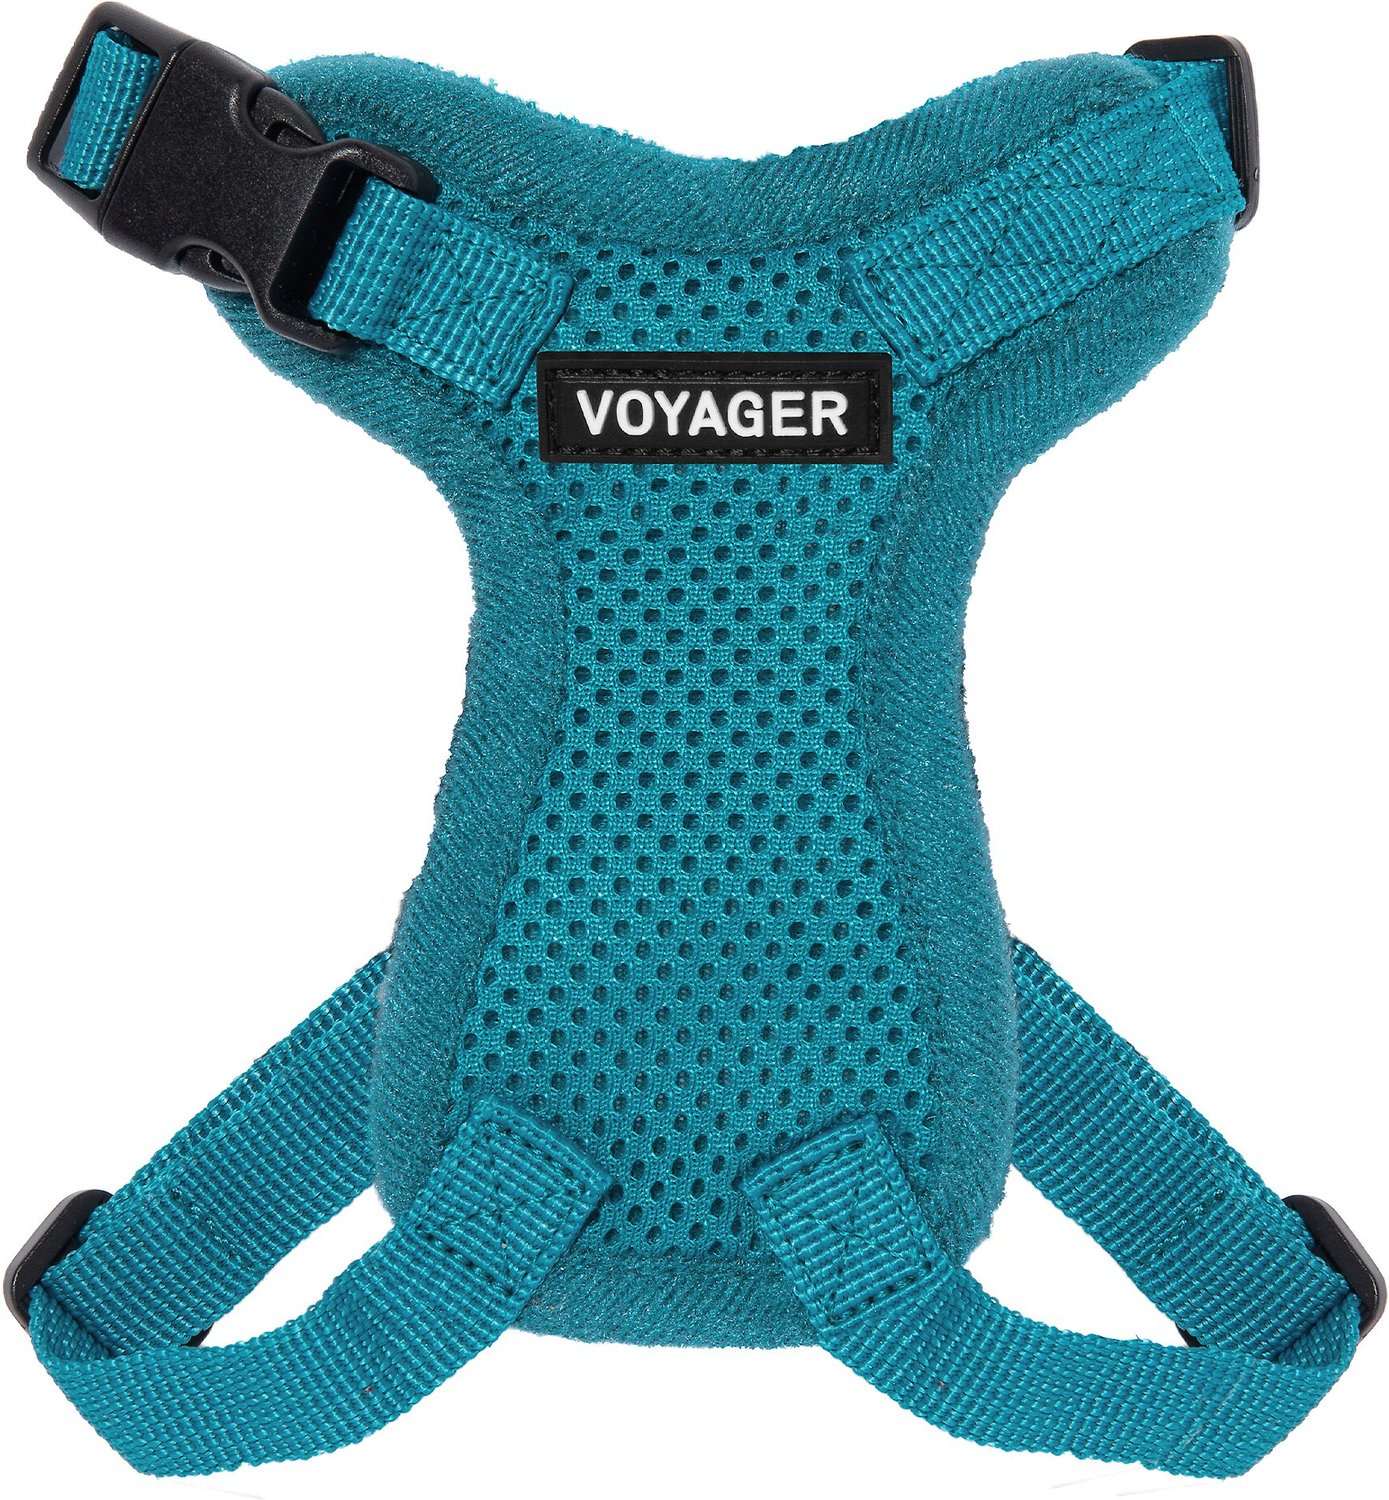 Turquoise, XS Voyager Step-in Lock Dog Harness 217-TQB-XS Chest: 11-16 * Fit Cats Inc Best Pet Supplies Adjustable Step-in Vest Harness for Small and Large Dogs 